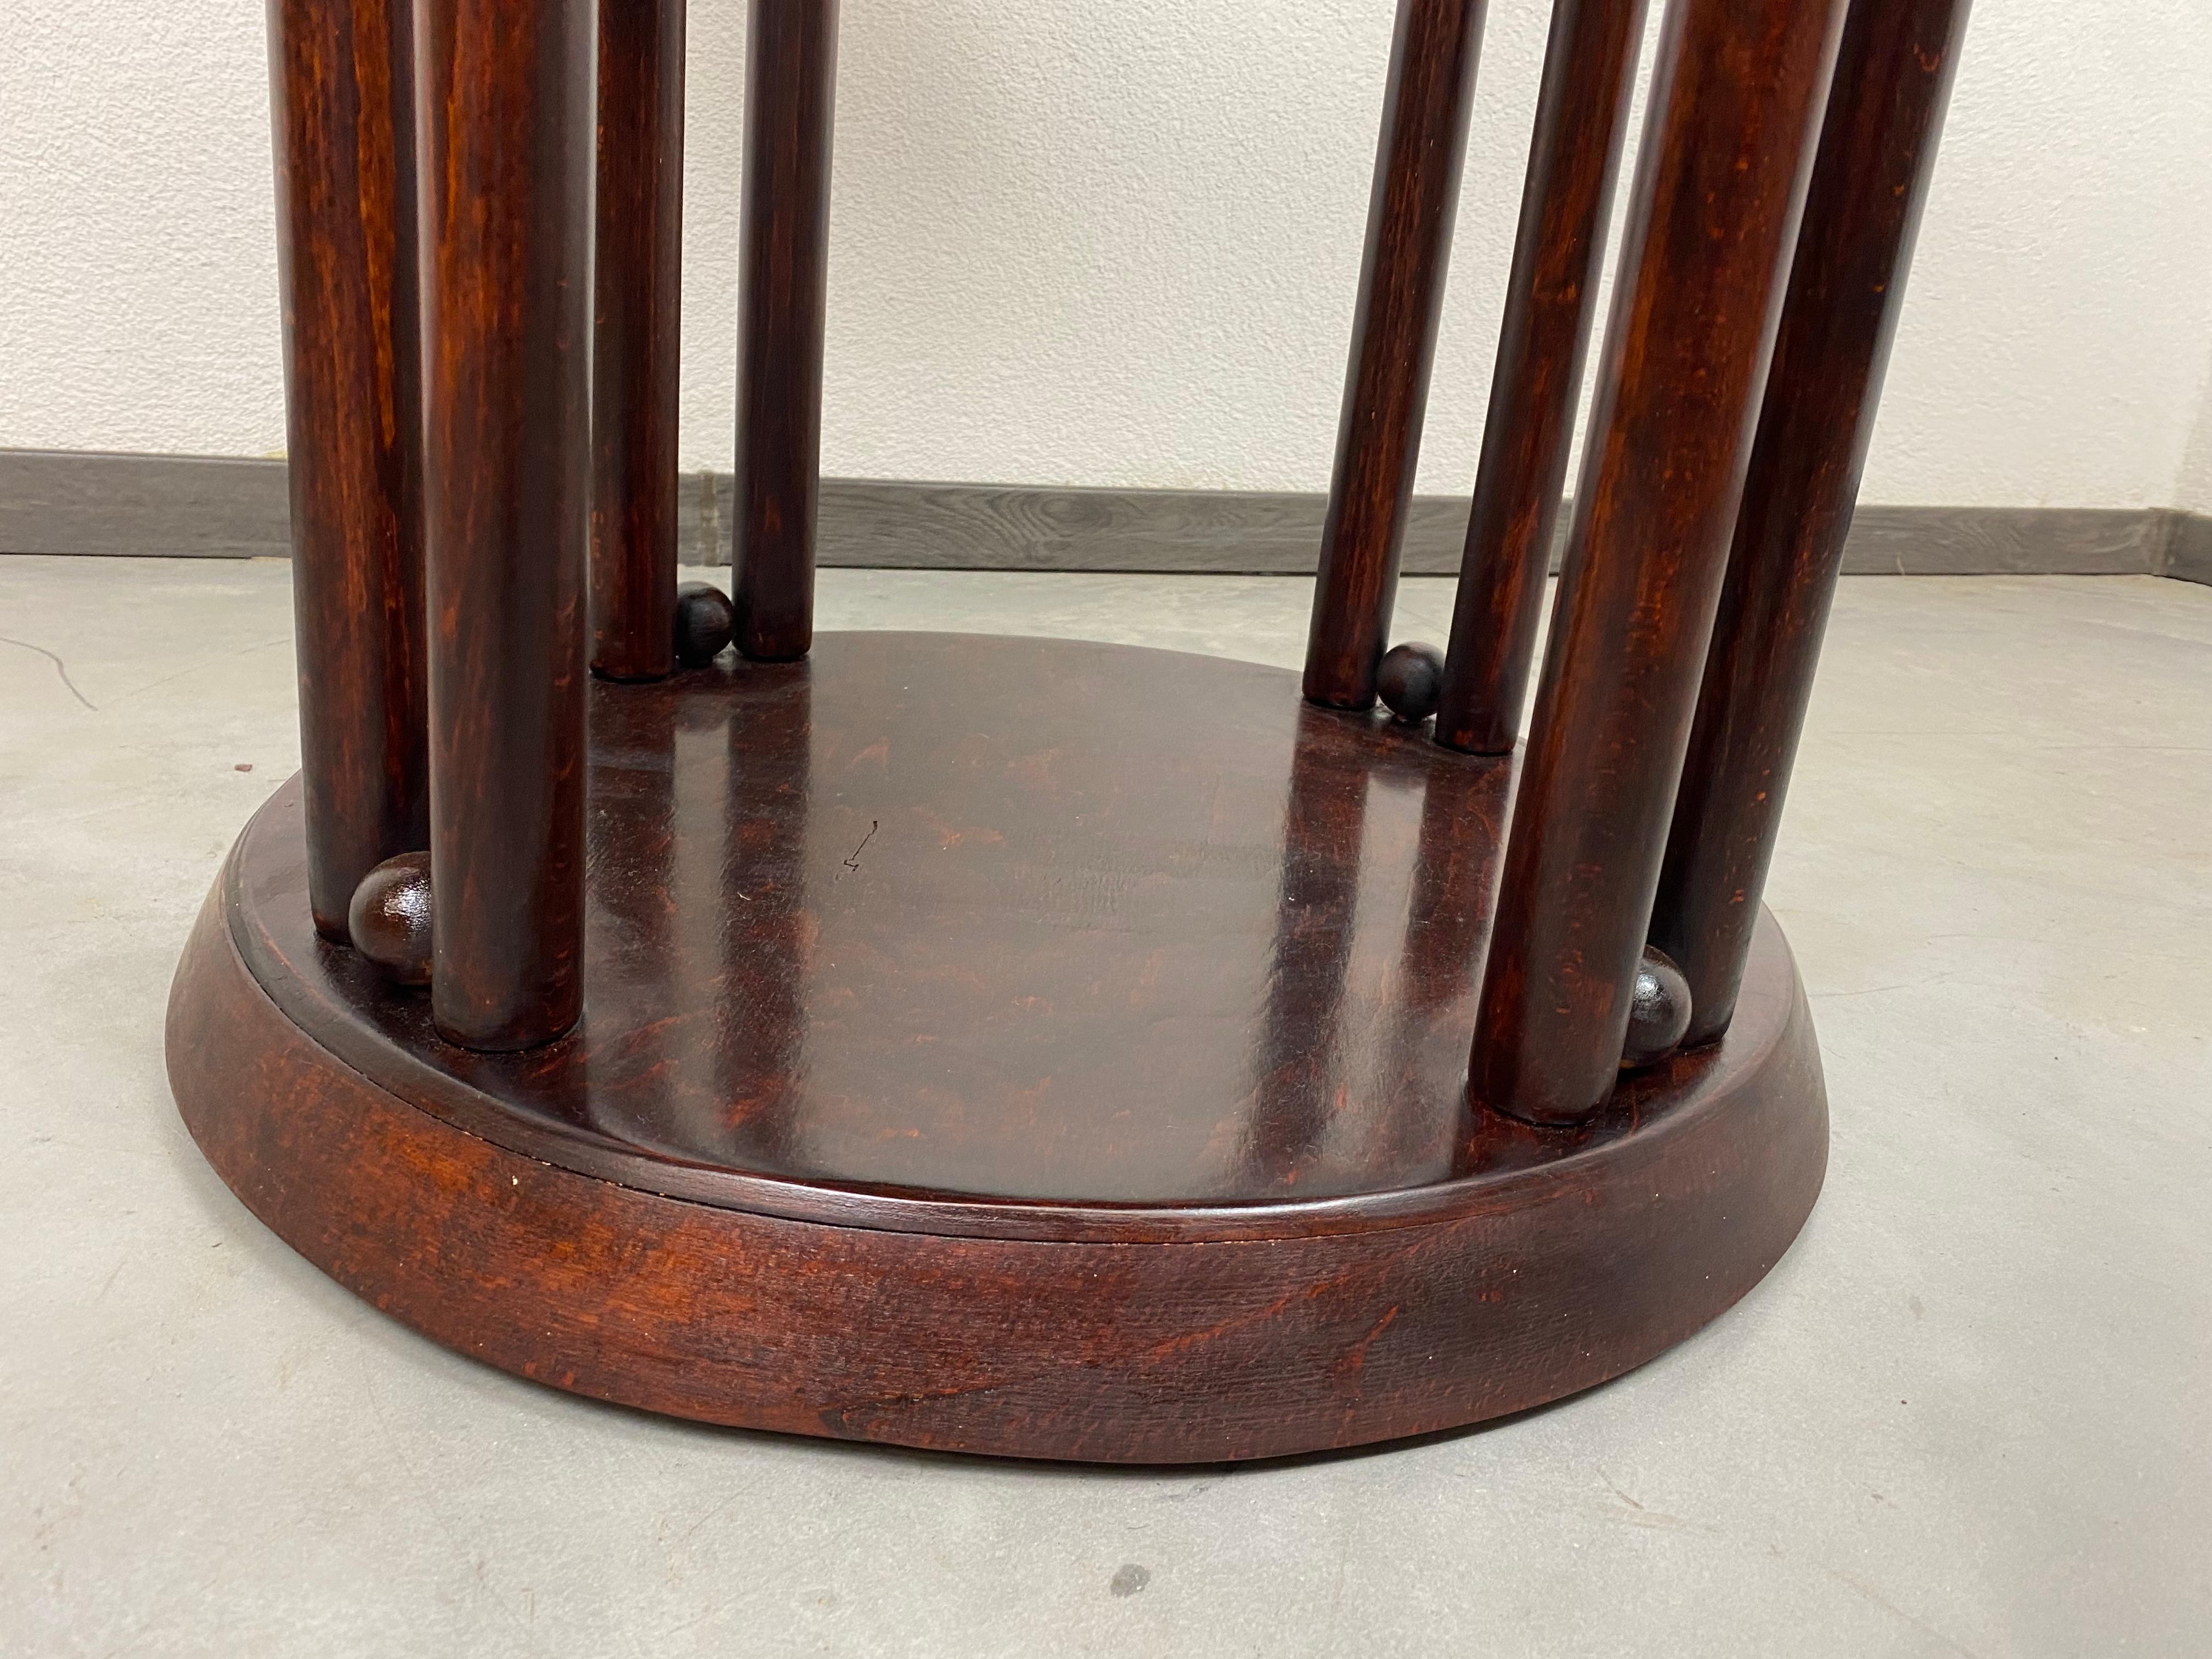 Fledermaus coffee table by Josef Hoffmann for Thonet professionally stained and repolished.